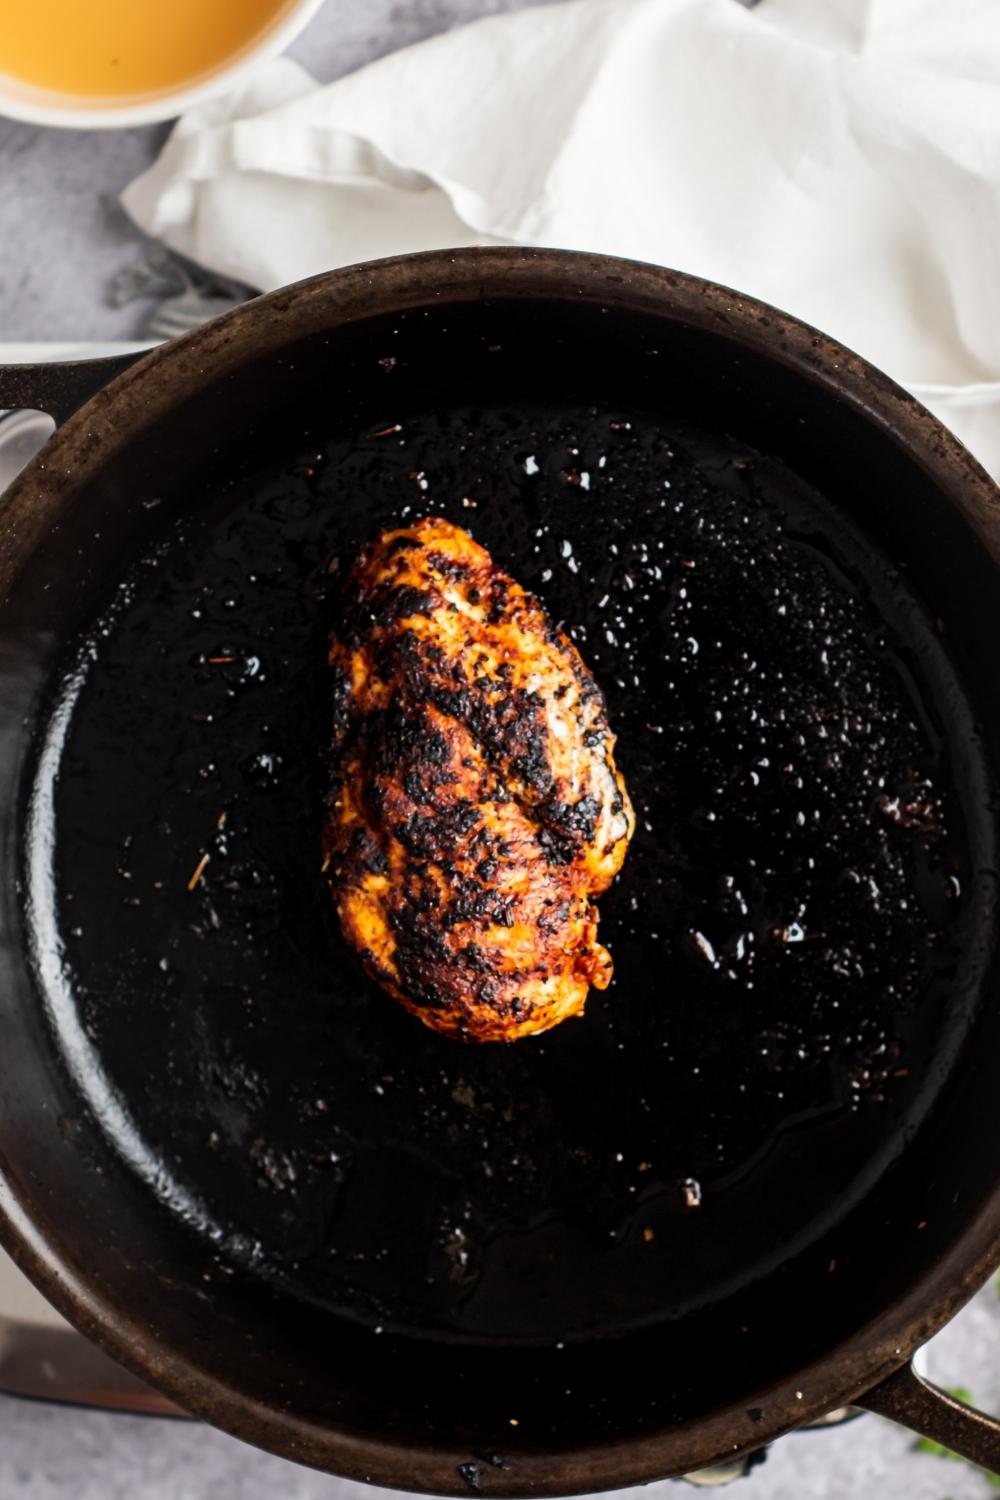 Overhead view of a skillet with a charred chicken breast.